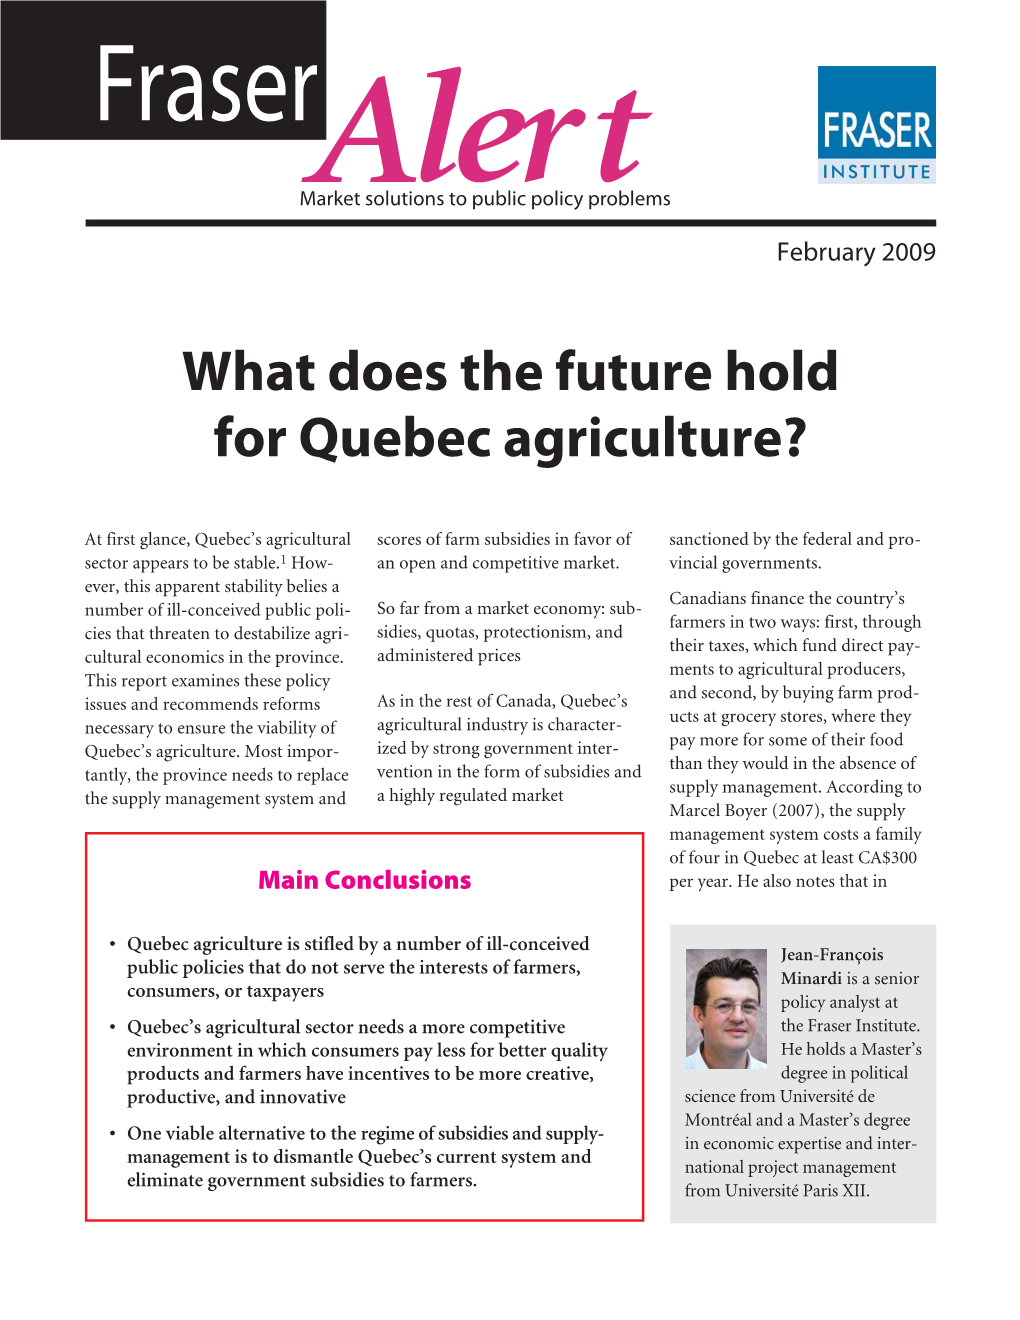 What Does the Future Hold for Quebec Agriculture?